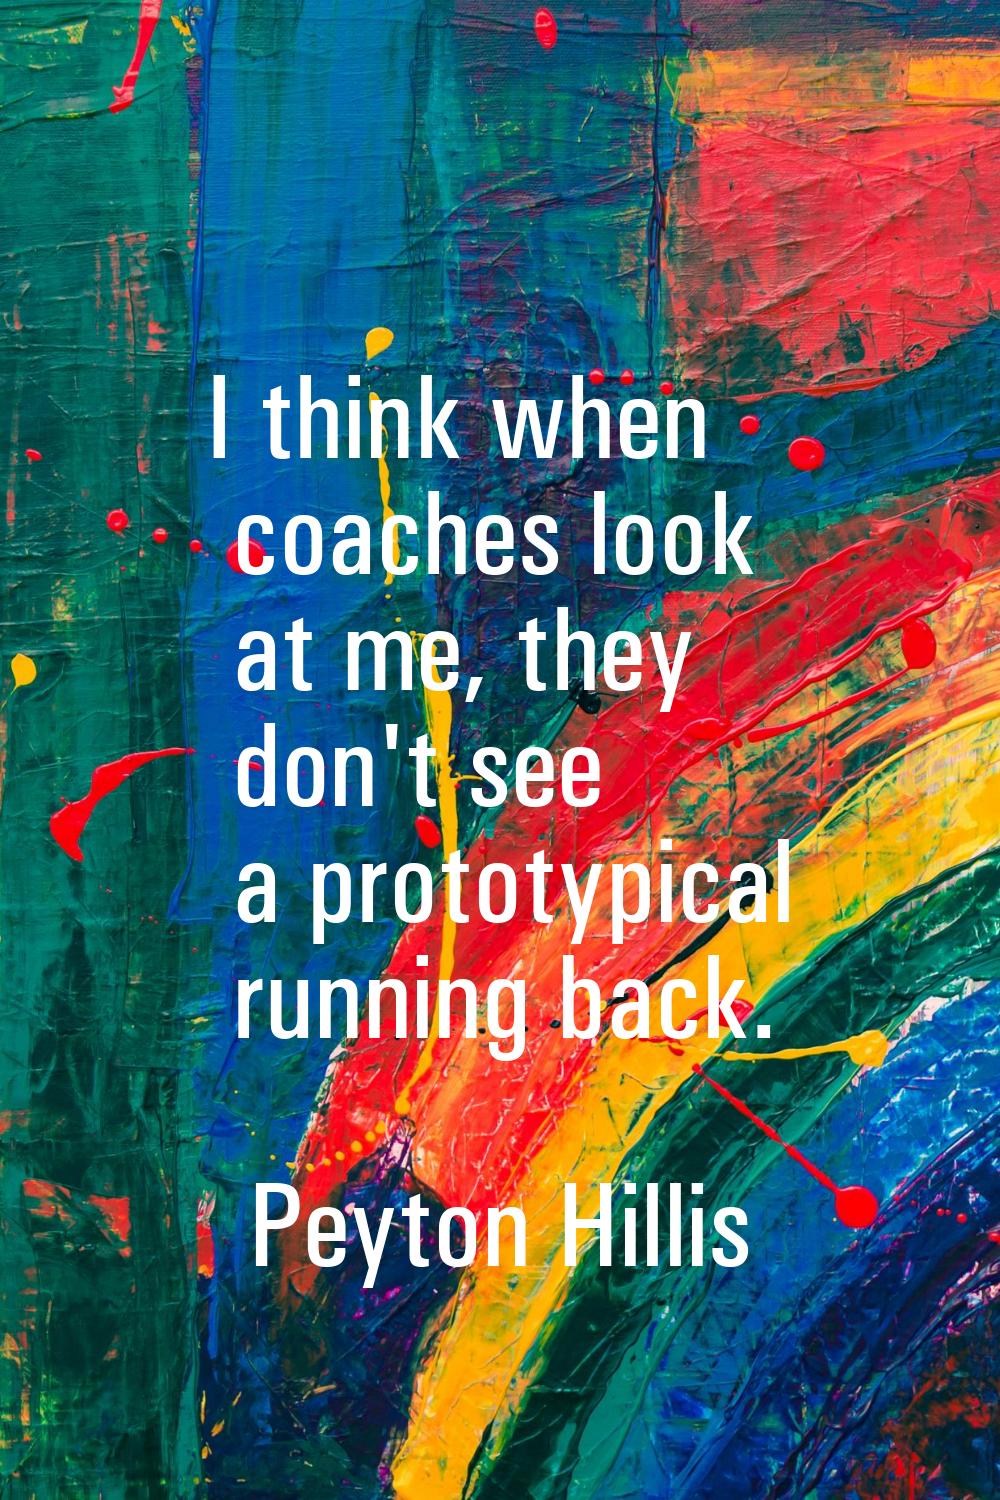 I think when coaches look at me, they don't see a prototypical running back.